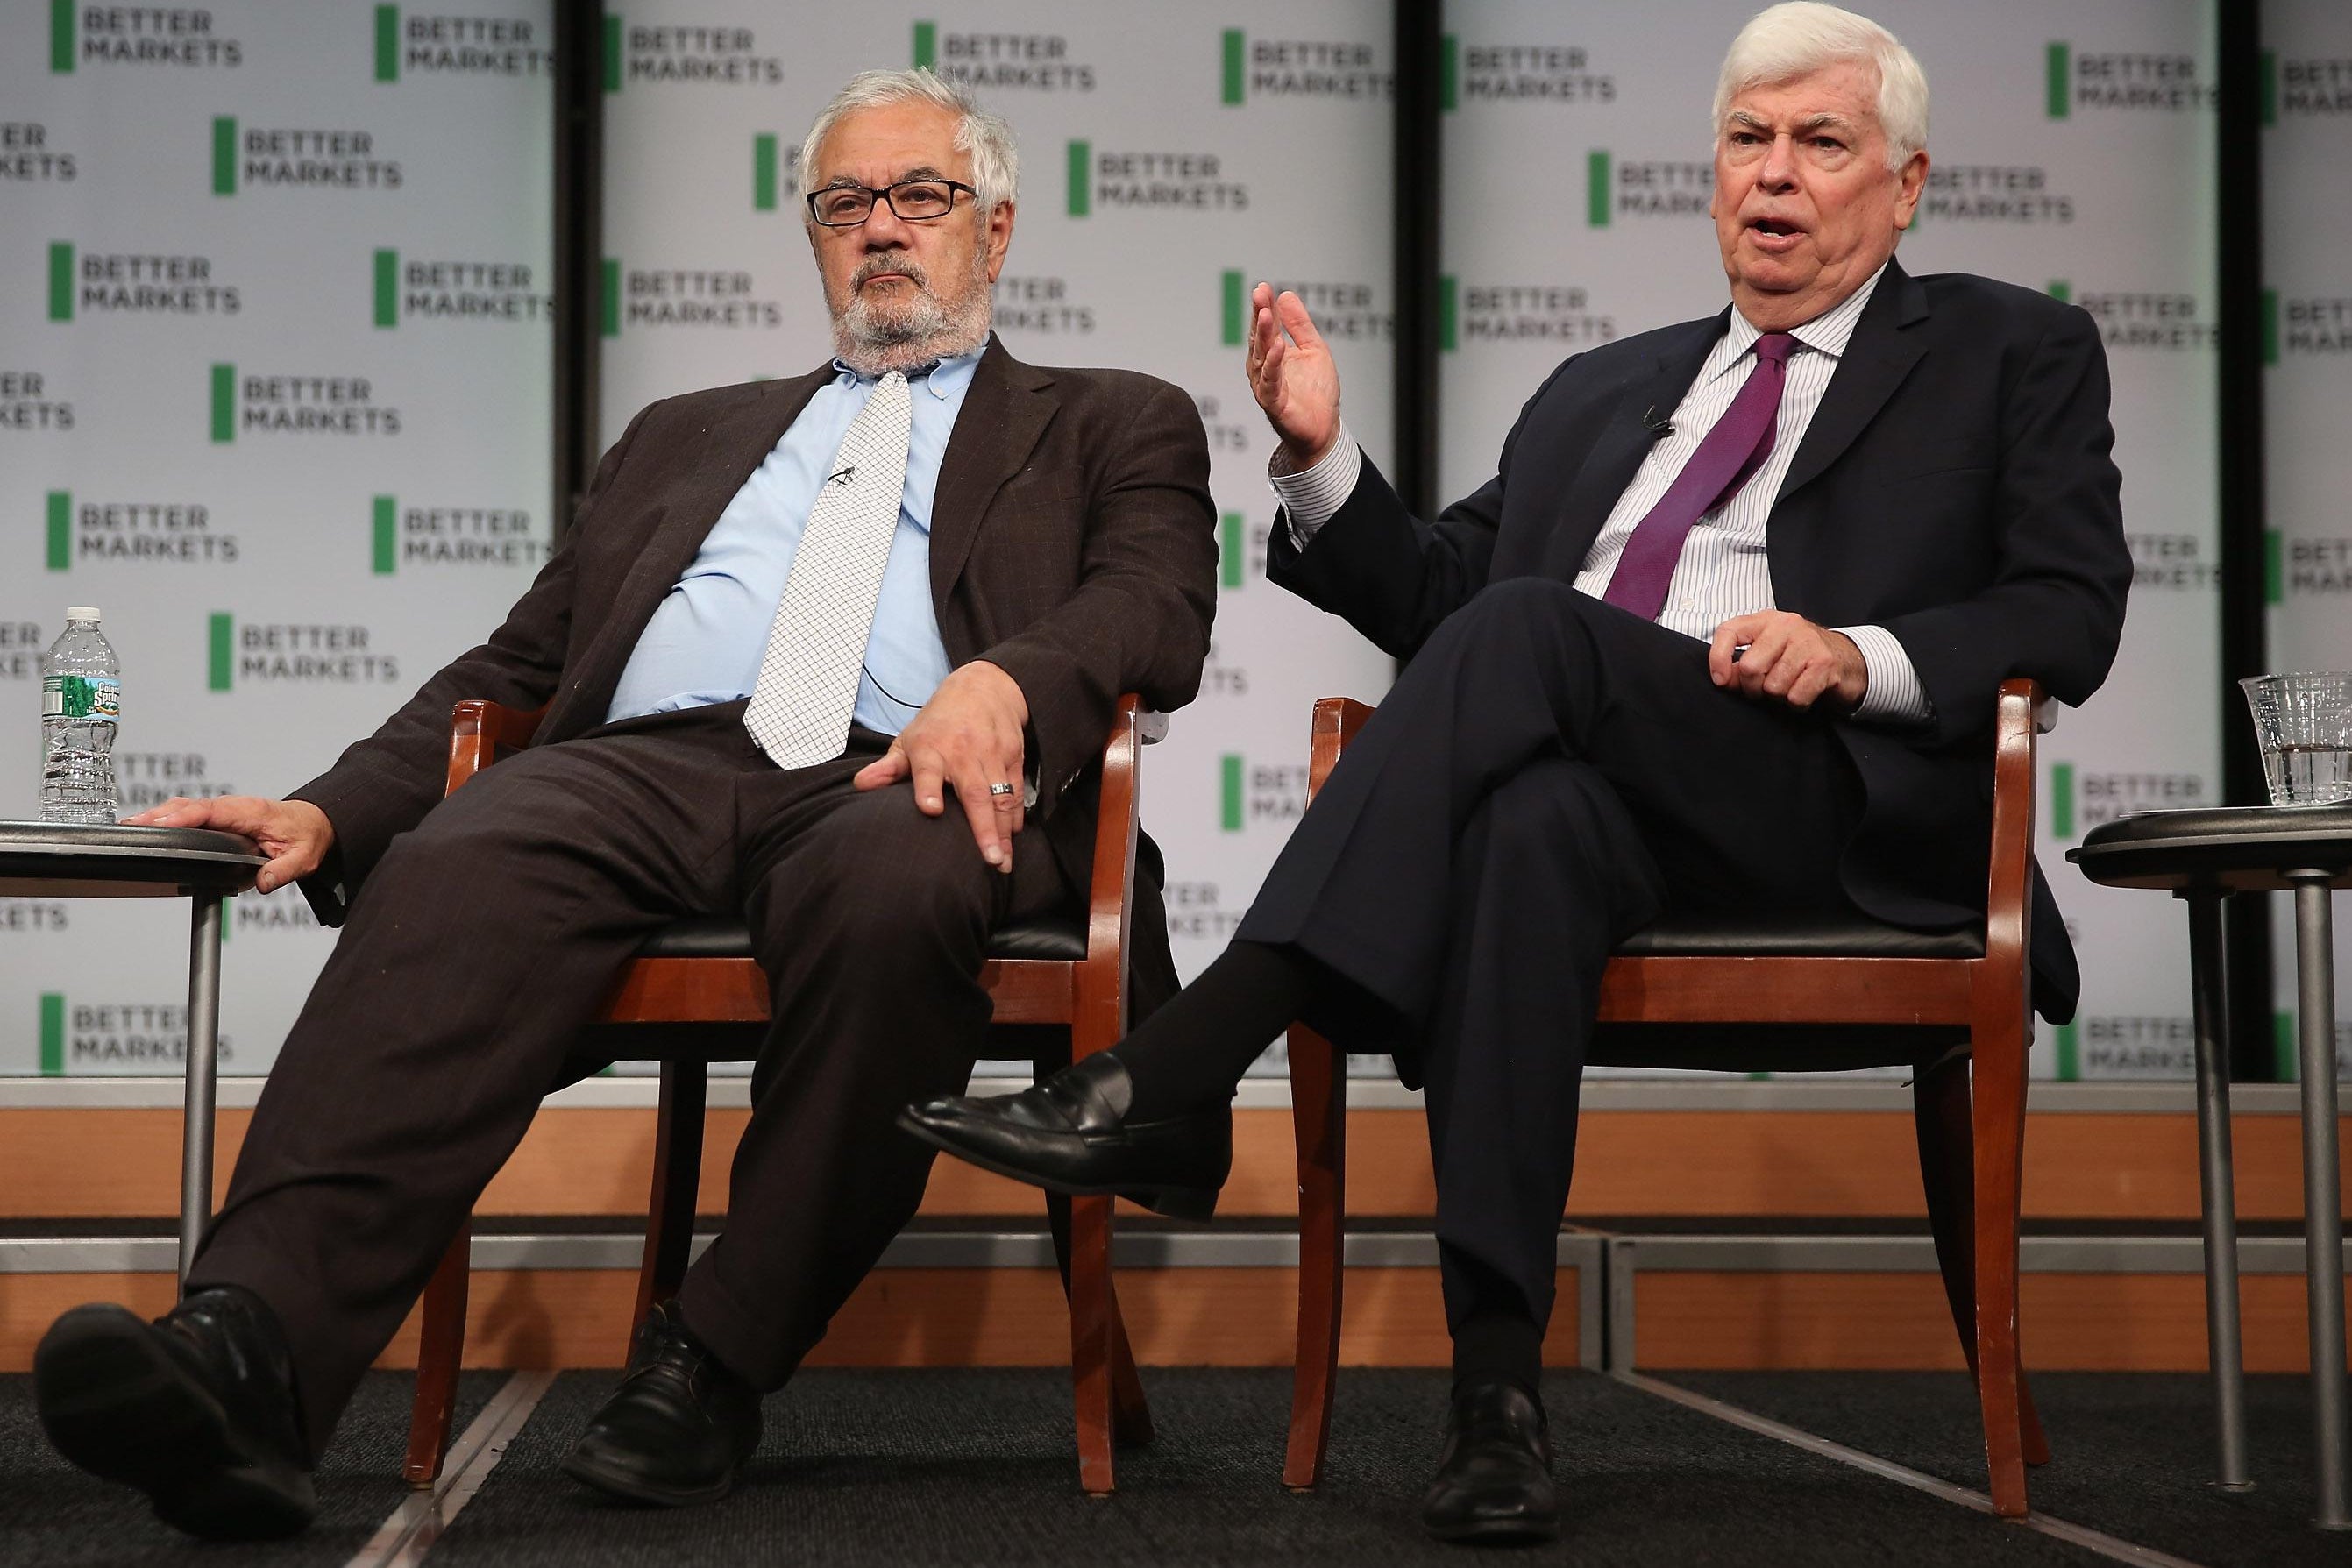 WASHINGTON, DC - JULY 20:  Former Rep. Barney Frank (D-MA) (L) and former Sen. Chris Dodd (D-CT) talk about their hallmark and namesake legislation, the Dodd-Frank Wall Street reform law, on the fifth anniversary of the law at the Newseum July 20, 2015 in Washington, DC. The event was hosted by Better Markets, a self-described nonpartisan, independent and nonprofit organization that promotes the public interest in the capital and commodity markets.  (Photo by Chip Somodevilla/Getty Images)